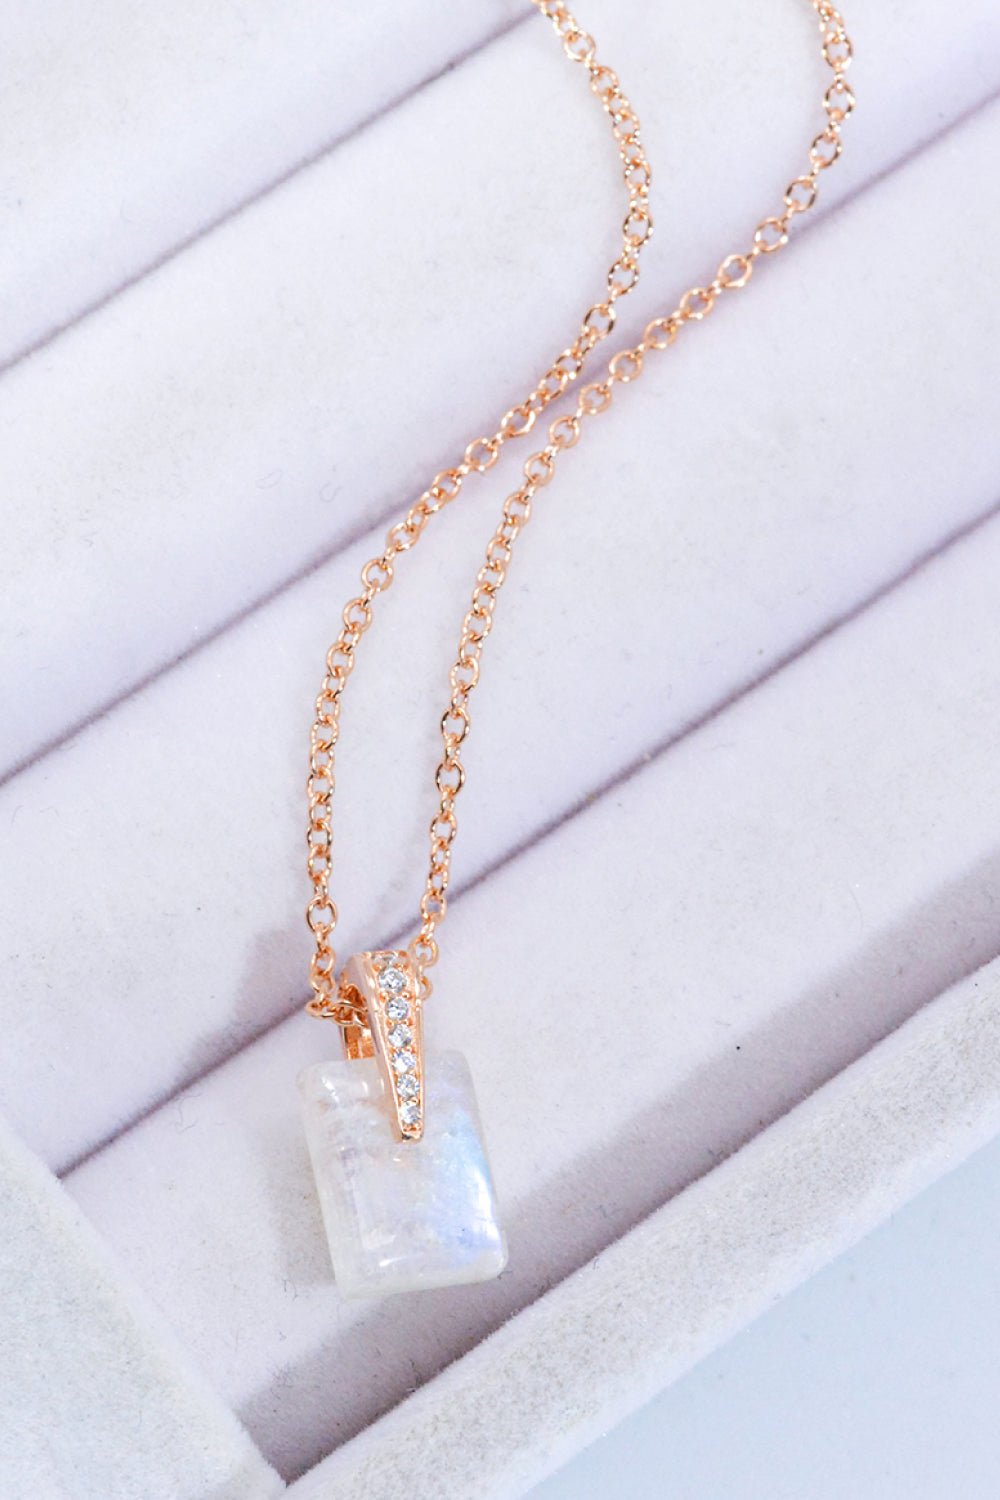 925 Sterling Silver Natural Moonstone Pendant Necklace - Uylee's Boutique